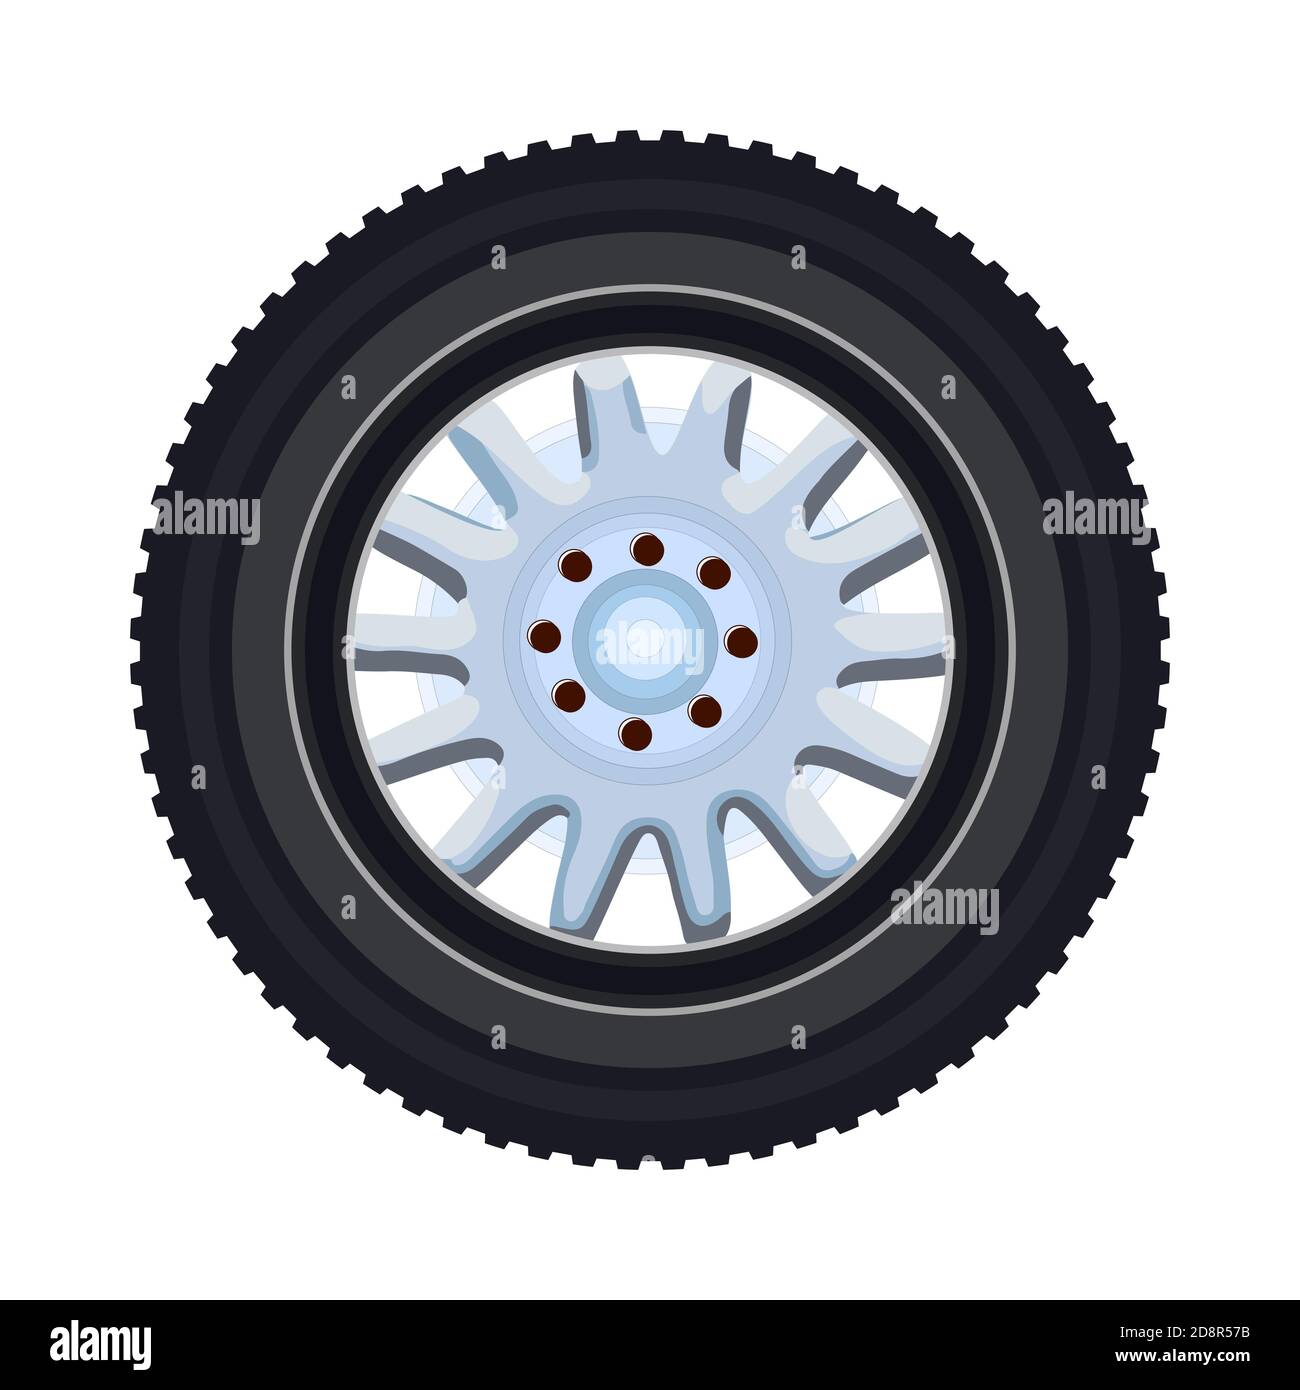 Tire isolated on white background. Wheel with a disk and rim for car or motorcycle. Repair and vulcanization, maintenance service logo. Stock vector Stock Vector